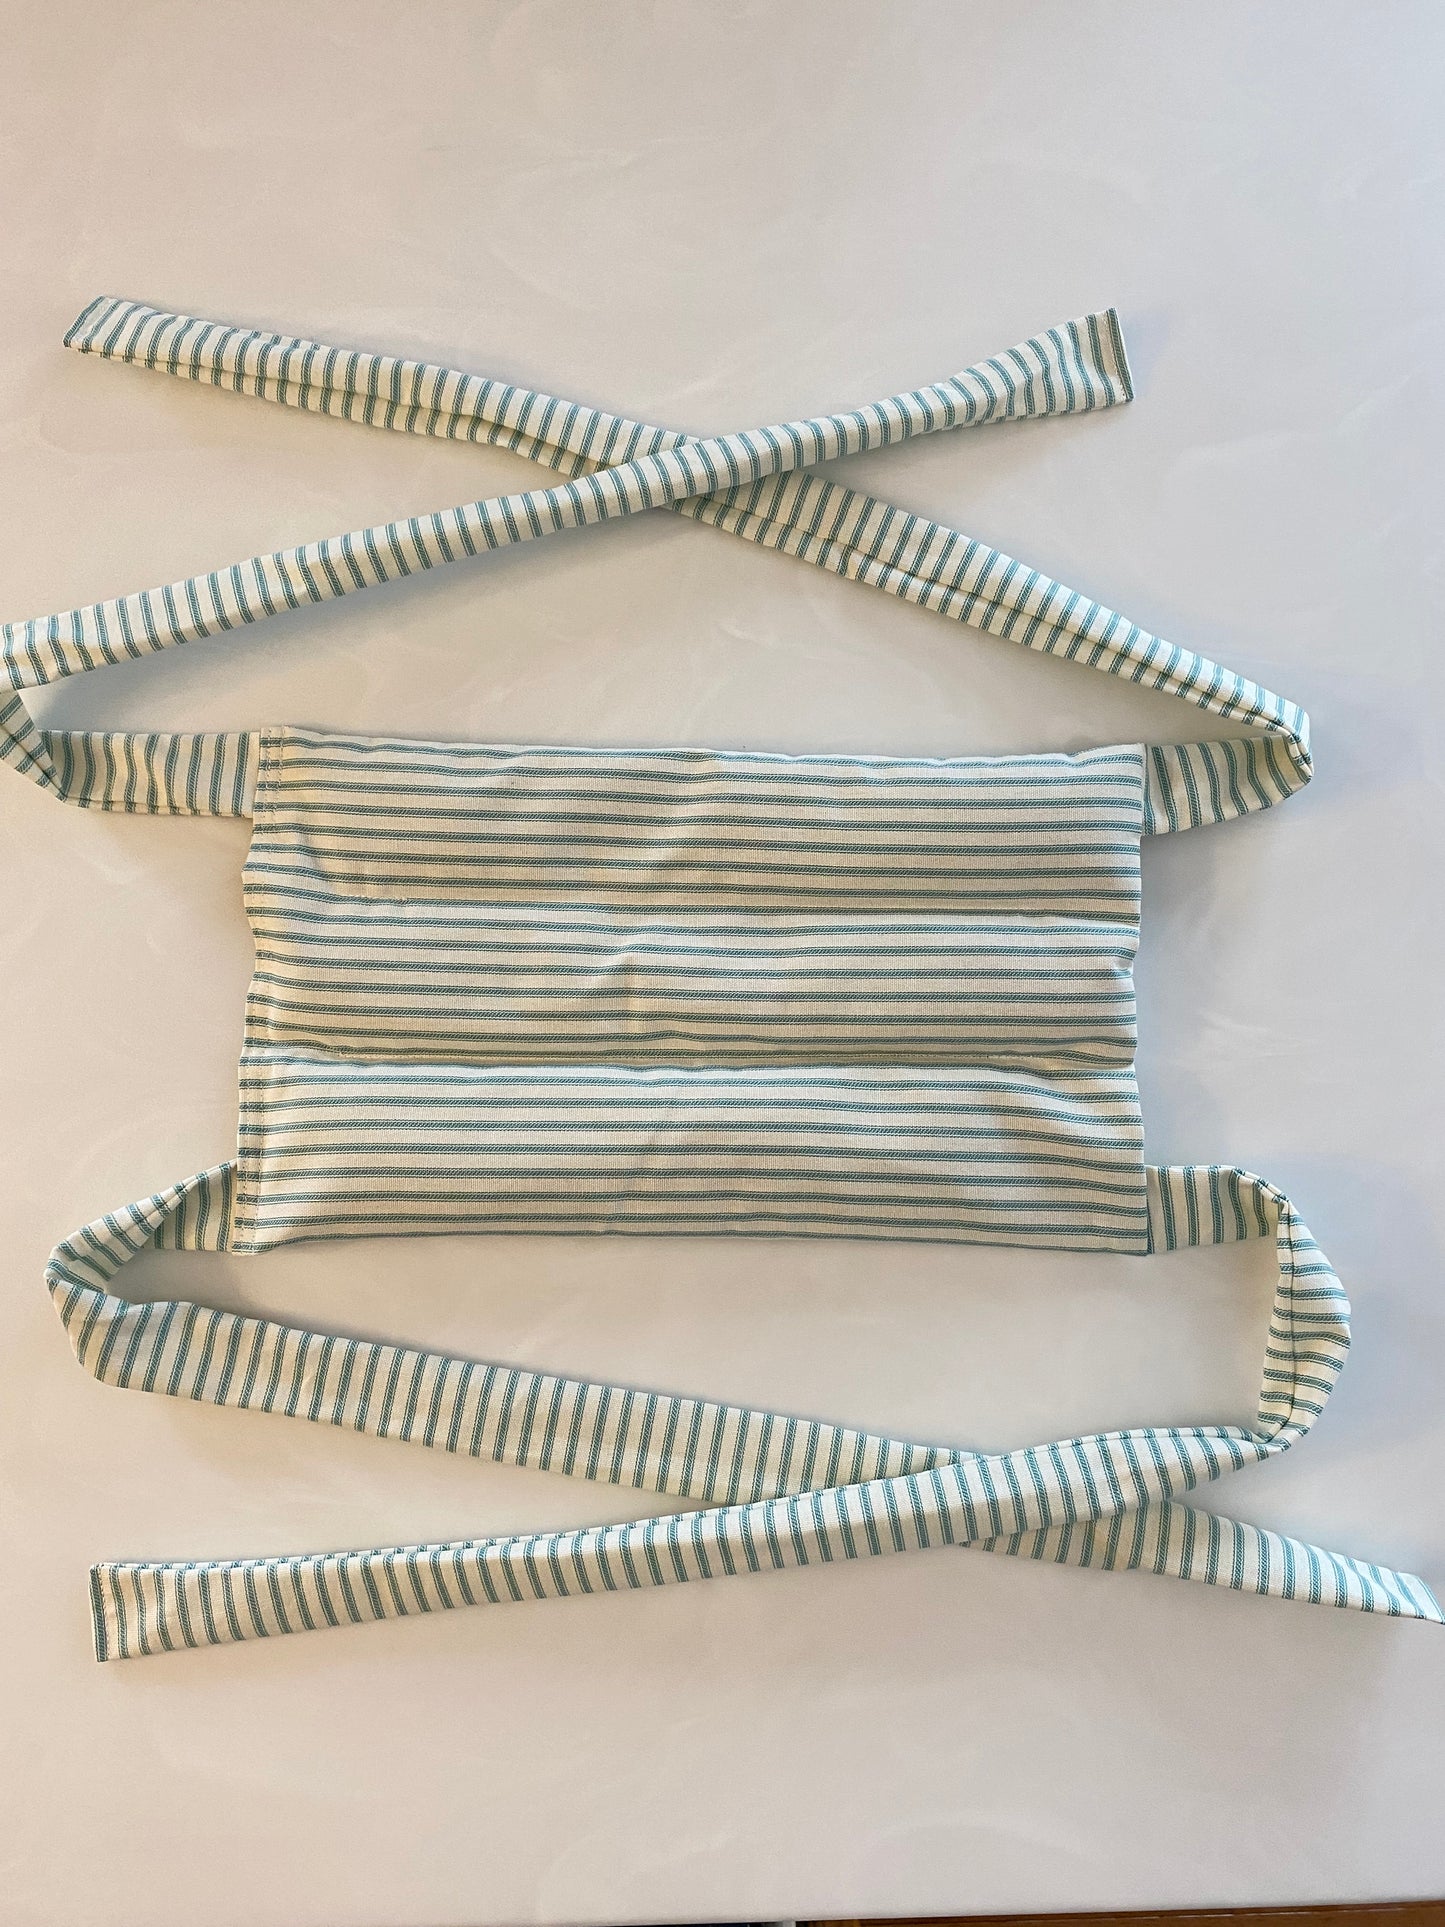 Teal Stripe Large Microwavable Rice Bag with Ties for Hands Free Use